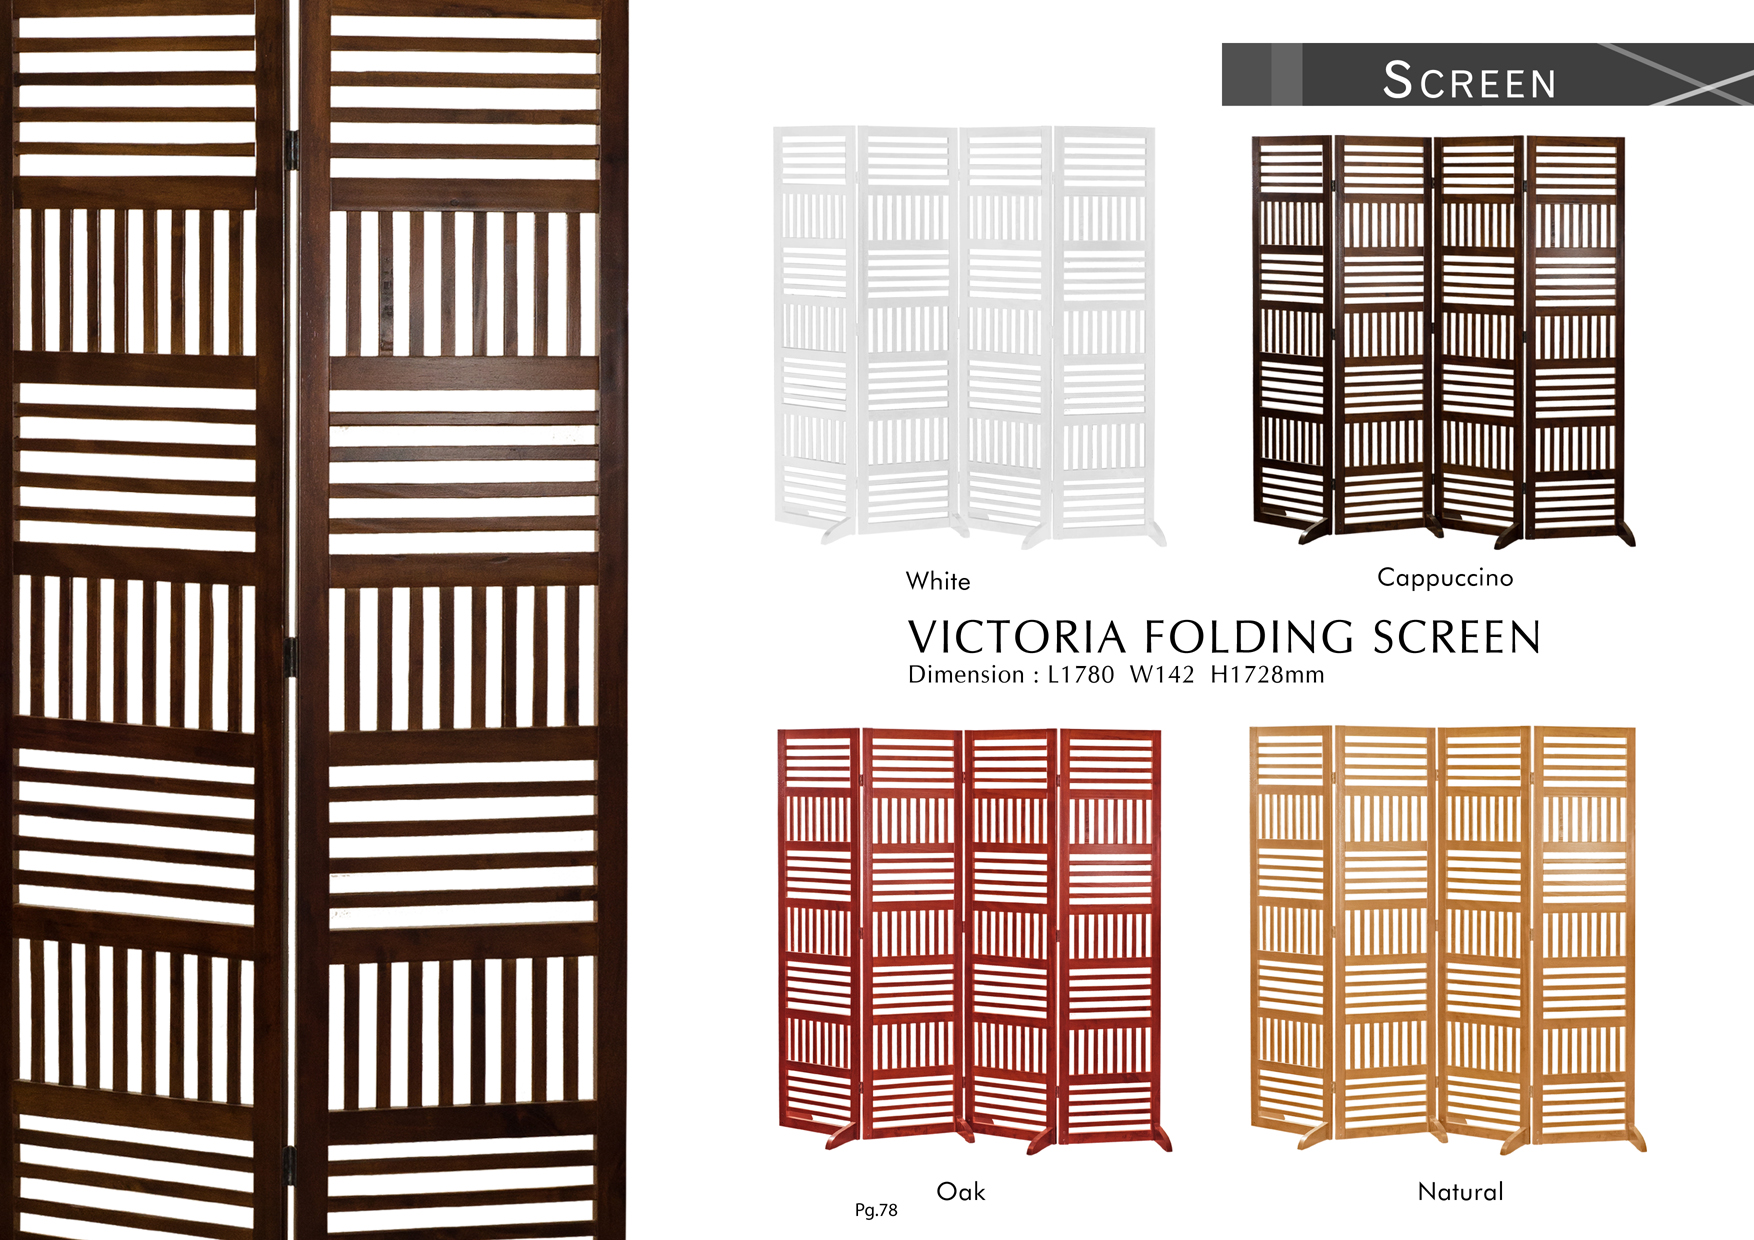 Product: PG78. VICTORIA FOLDING SCREEN